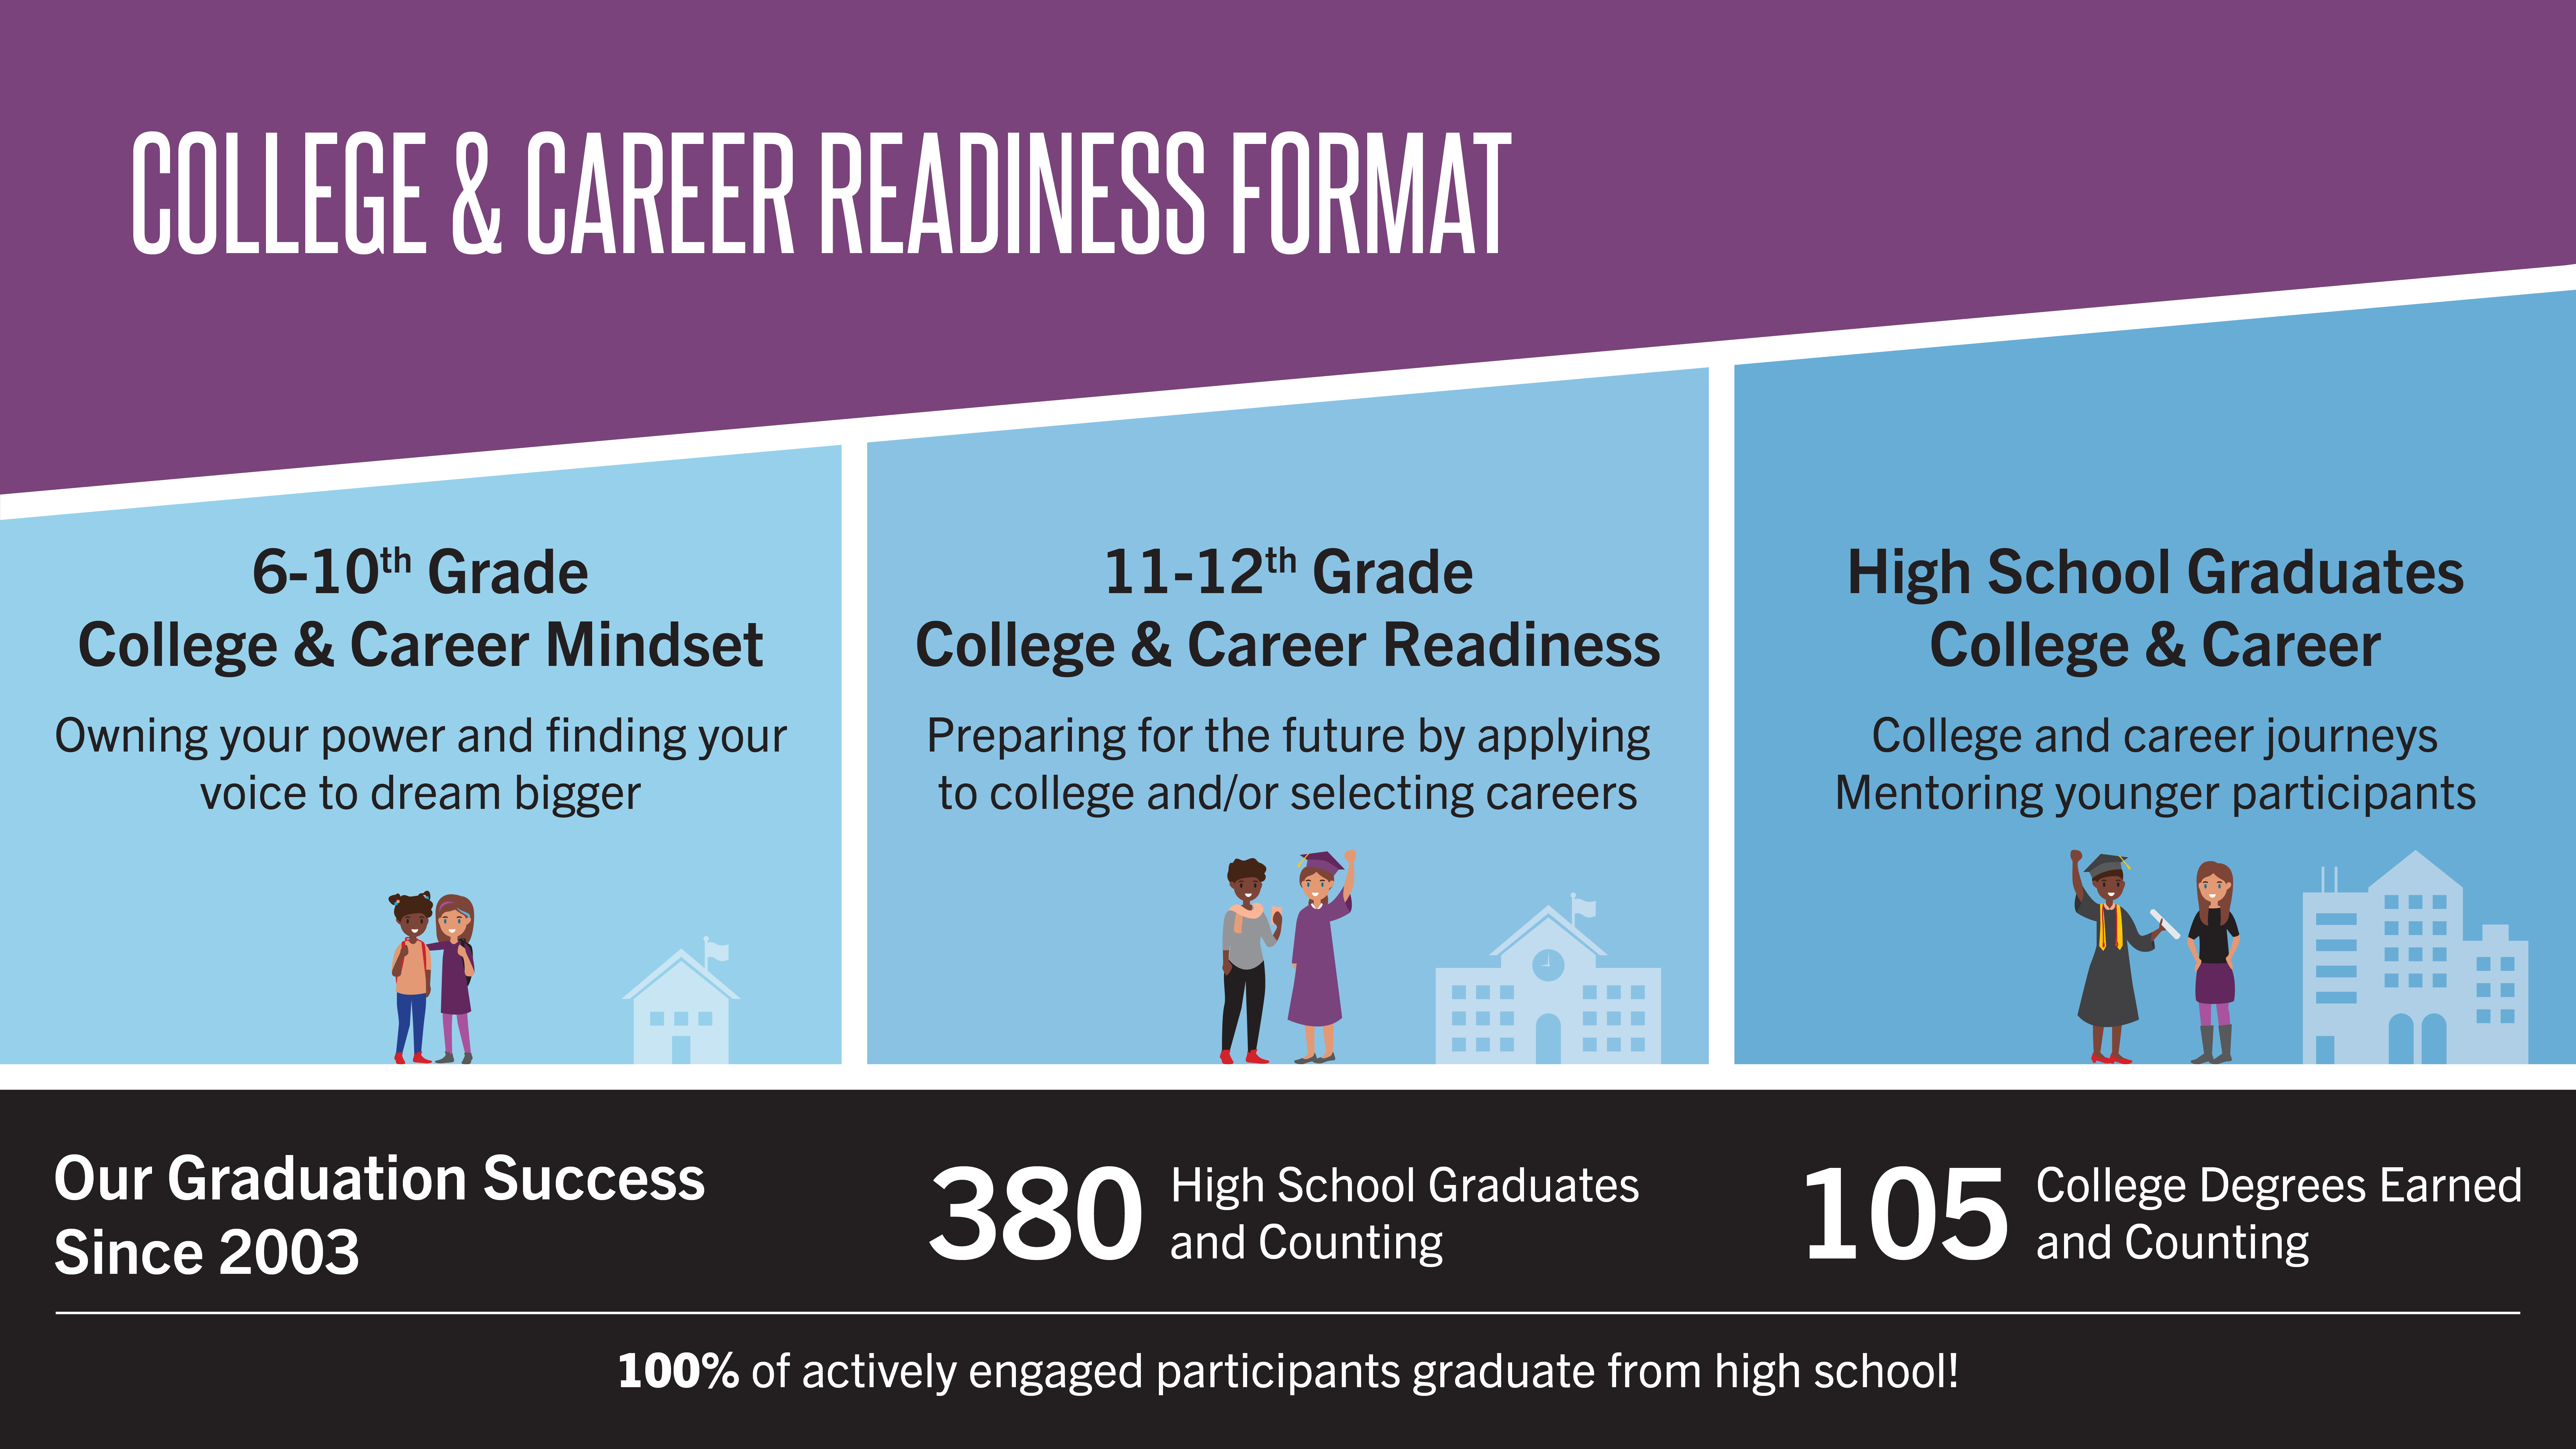 College & Career Readiness Format